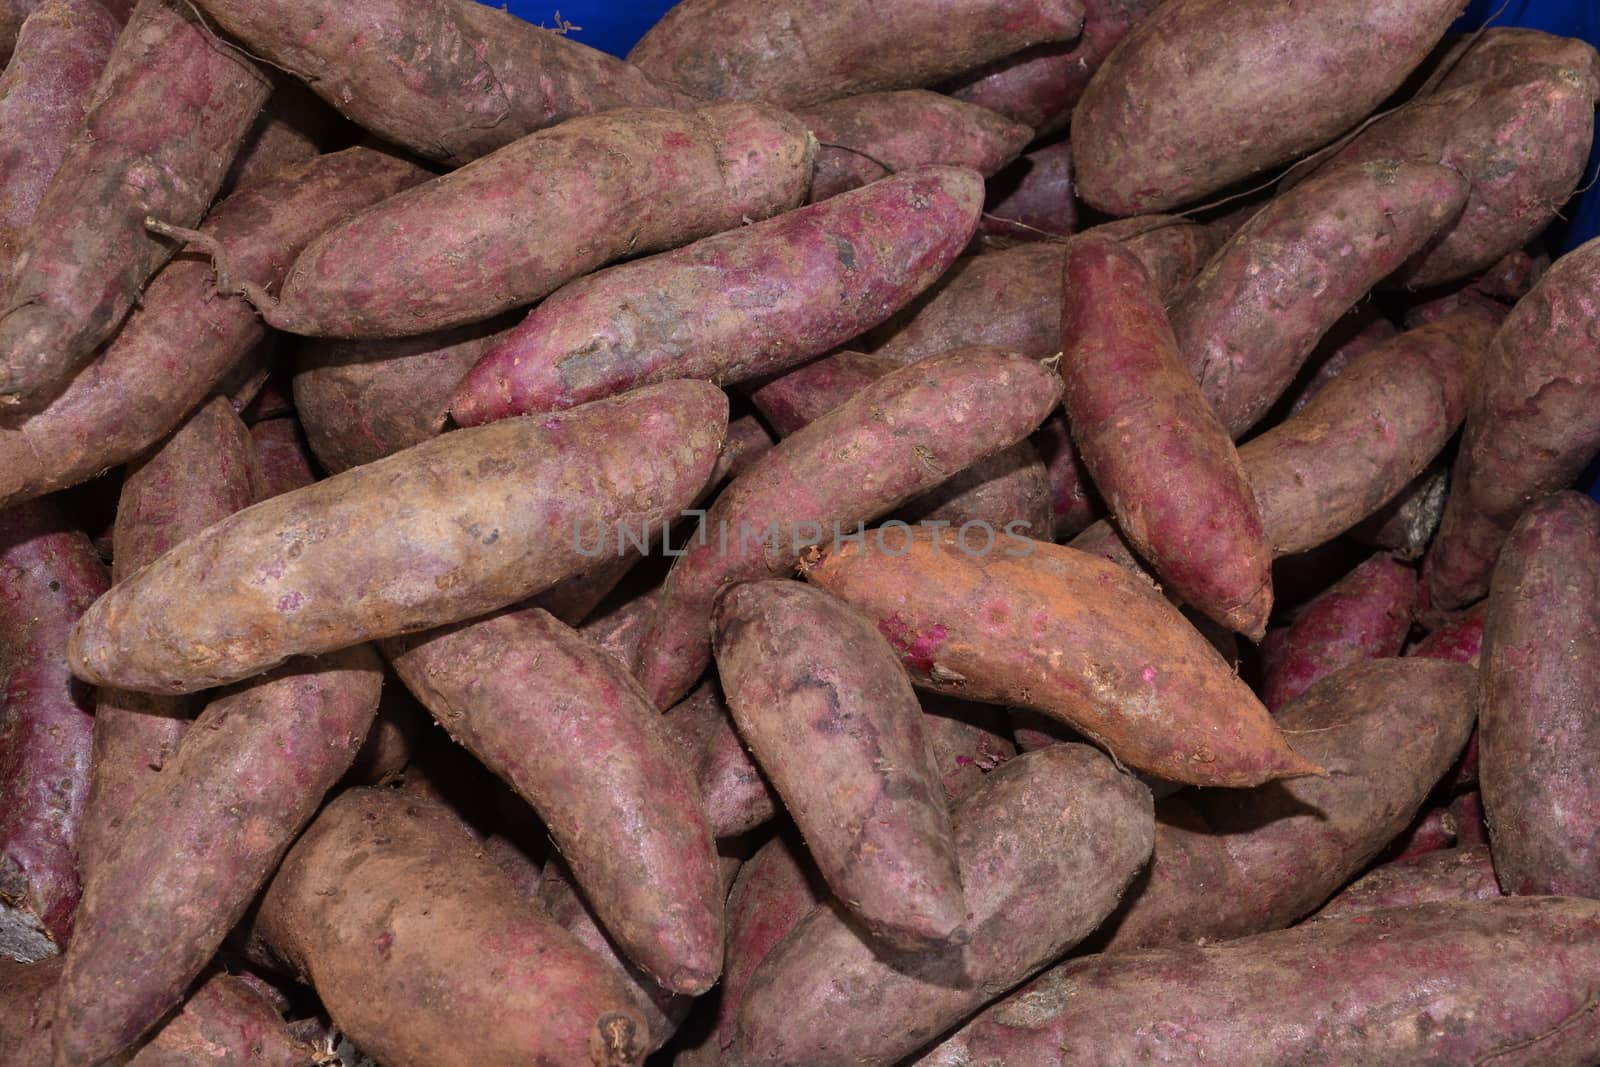 sweet potato or yam pile image which can be used as a background, note select focus with shallow depth of field